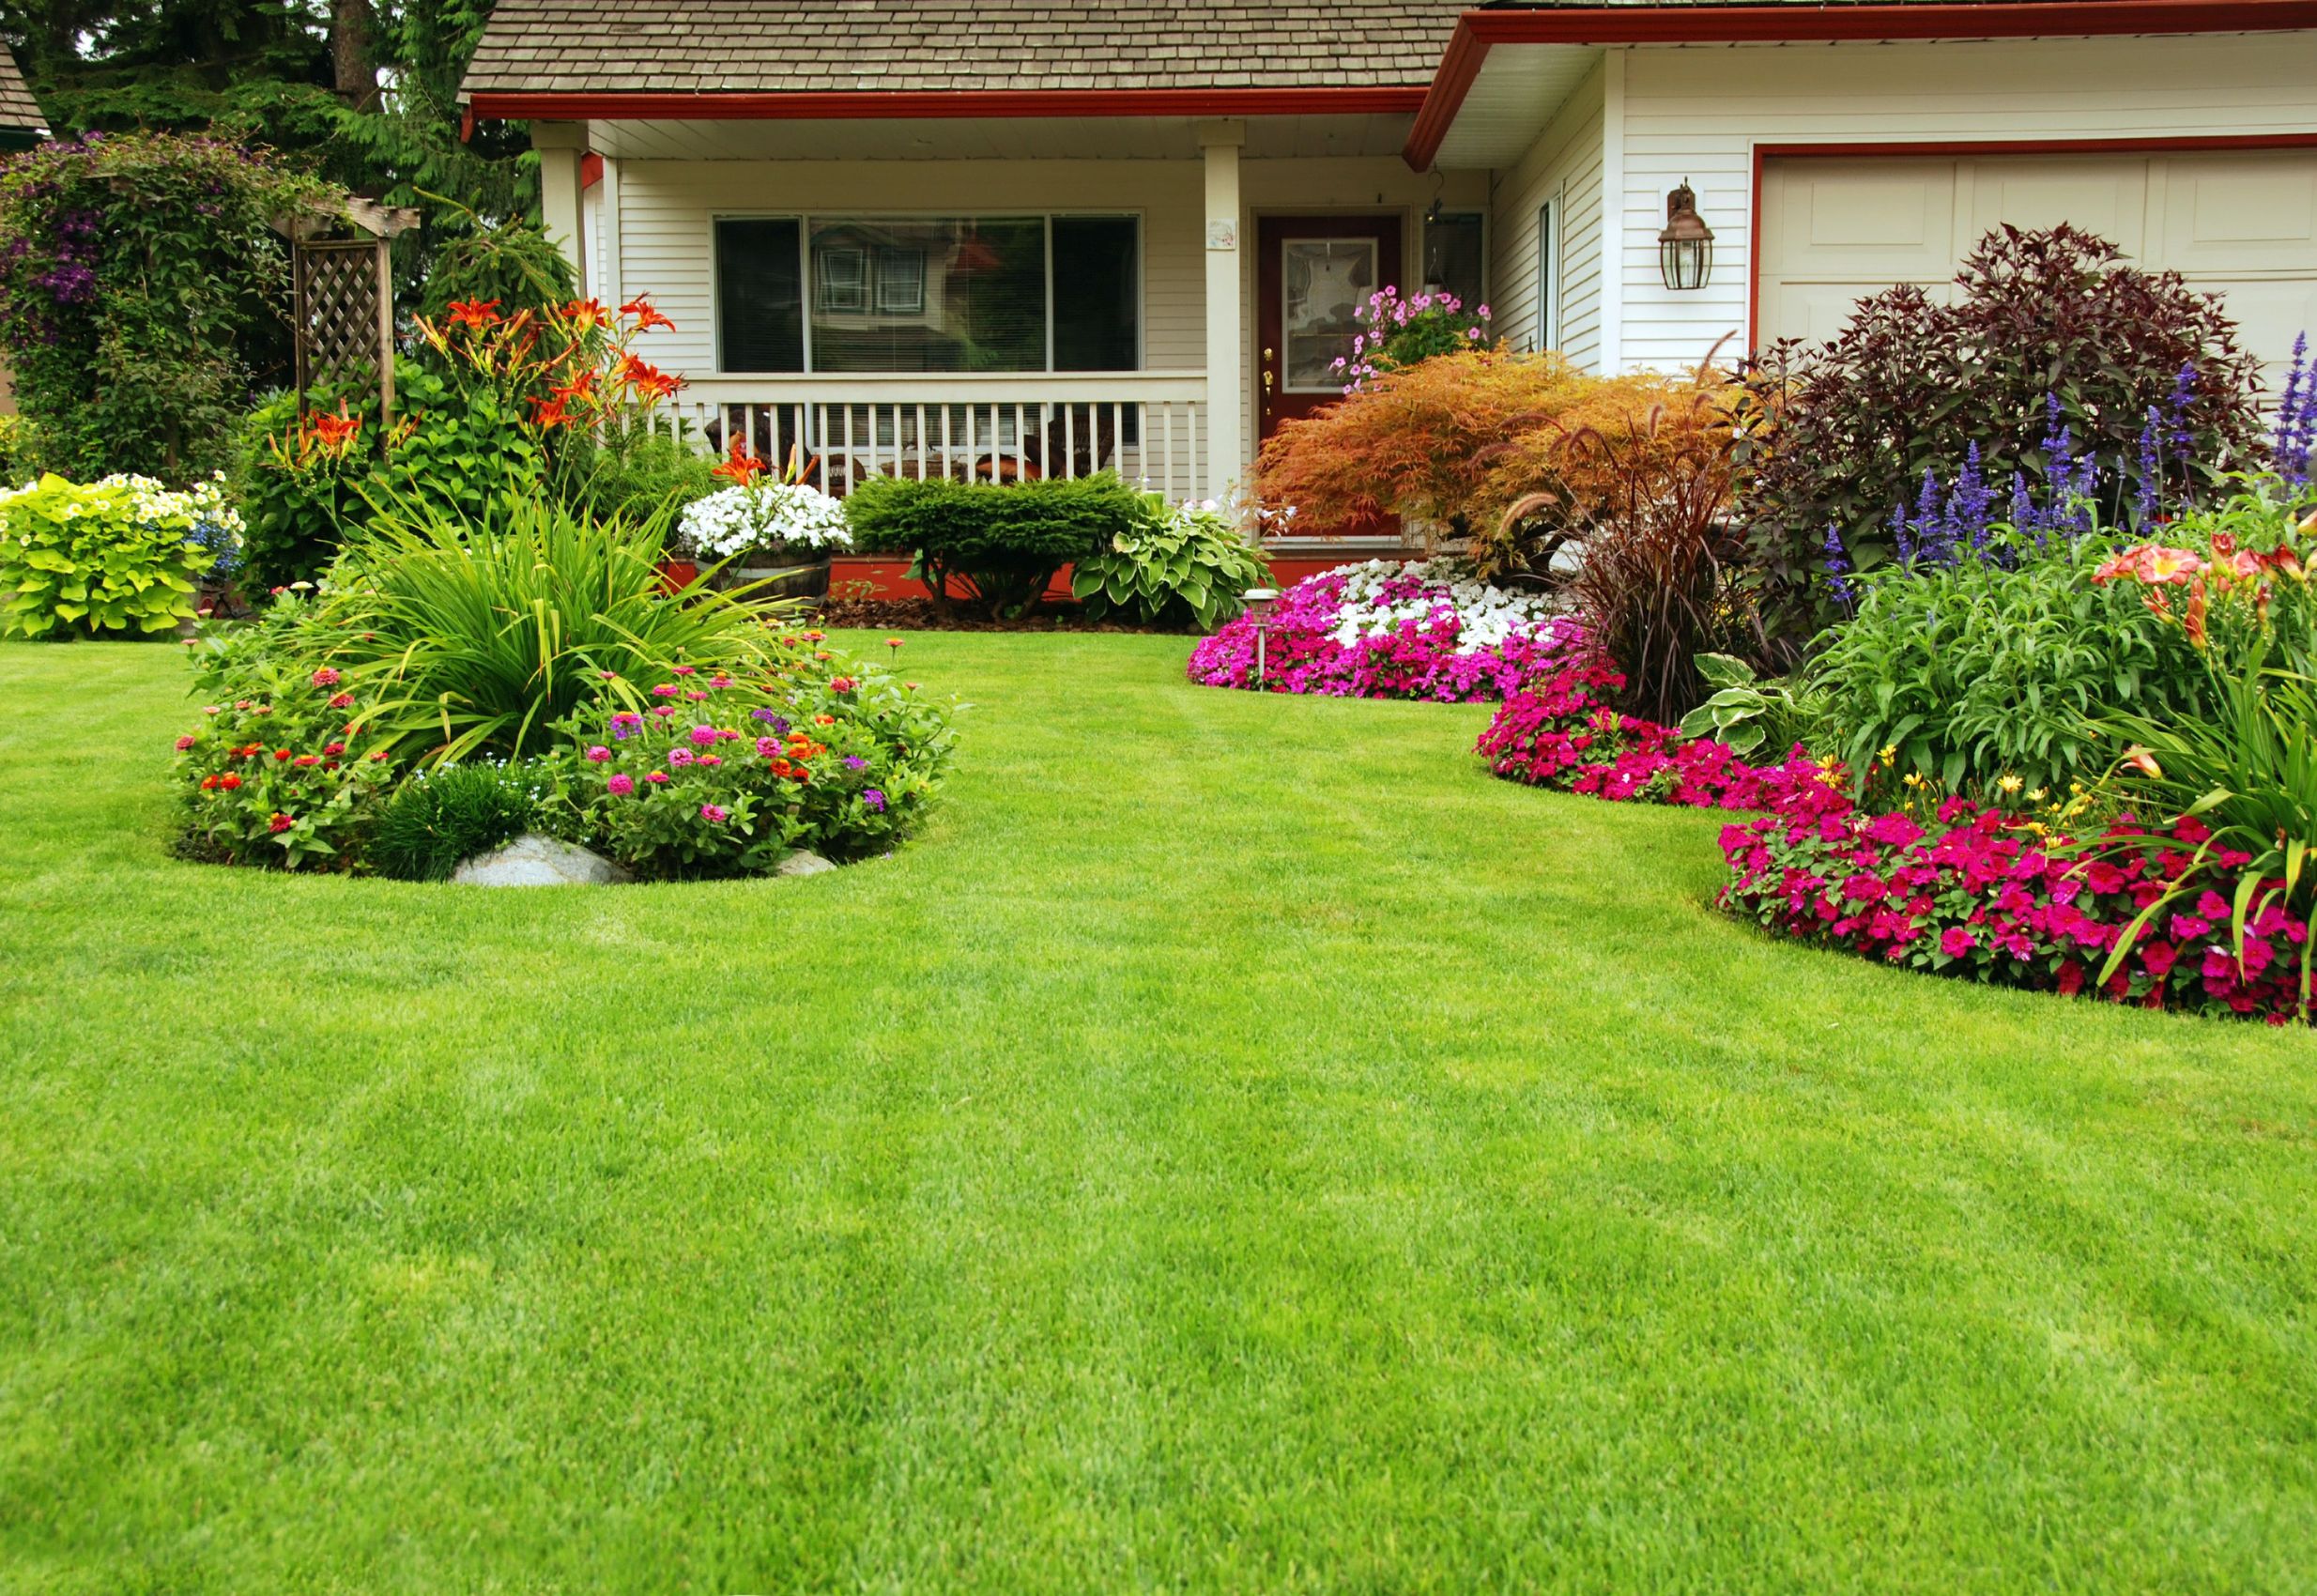 Lawn Care Services for Curb Appeal